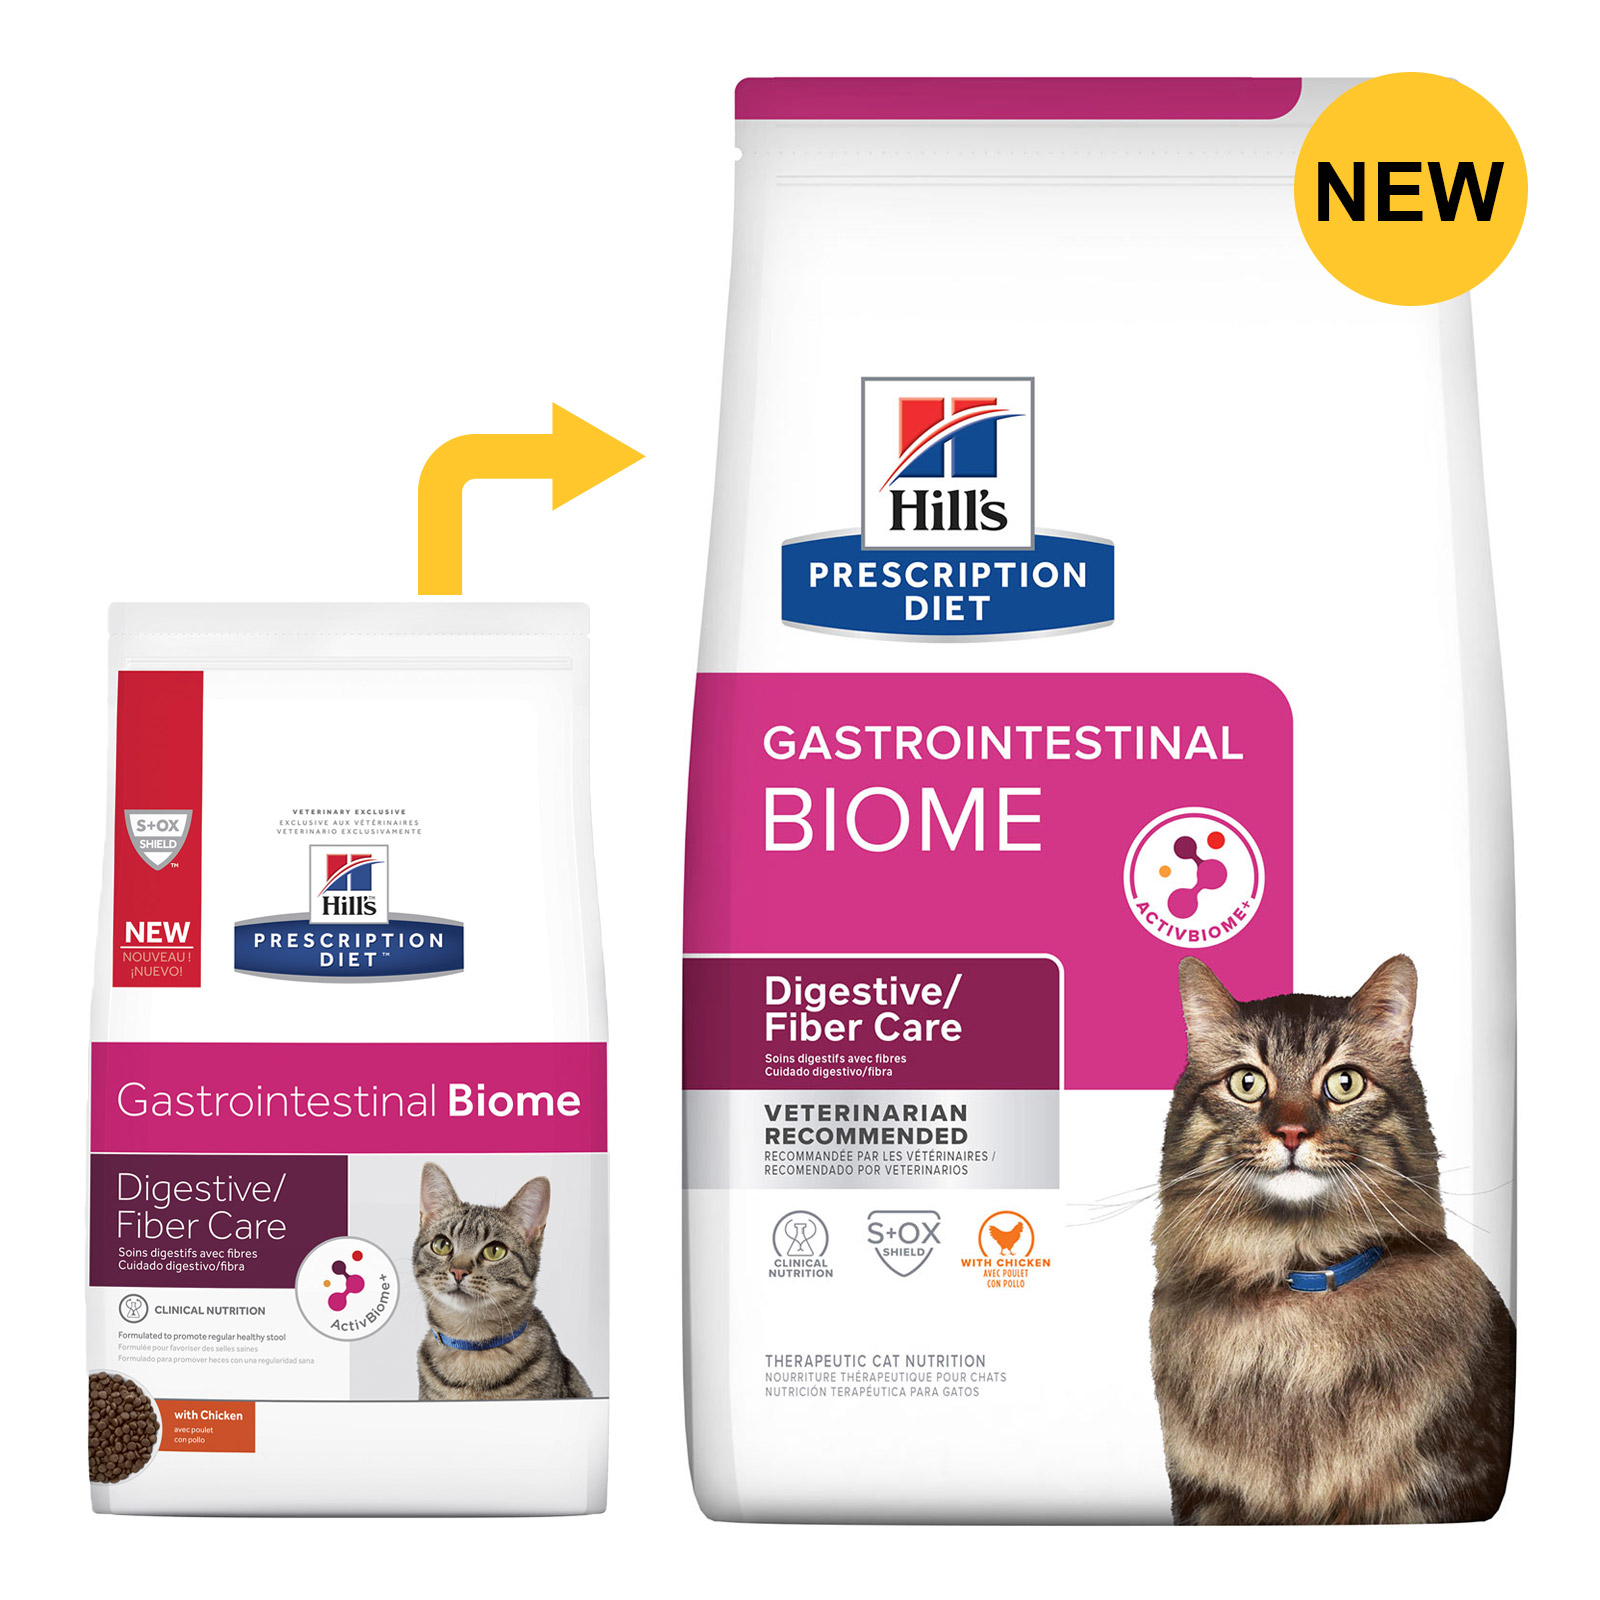 Hill's Prescription Diet Gastrointestinal Biome Digestive Fibre Care with Chicken Dry Cat Food for Food